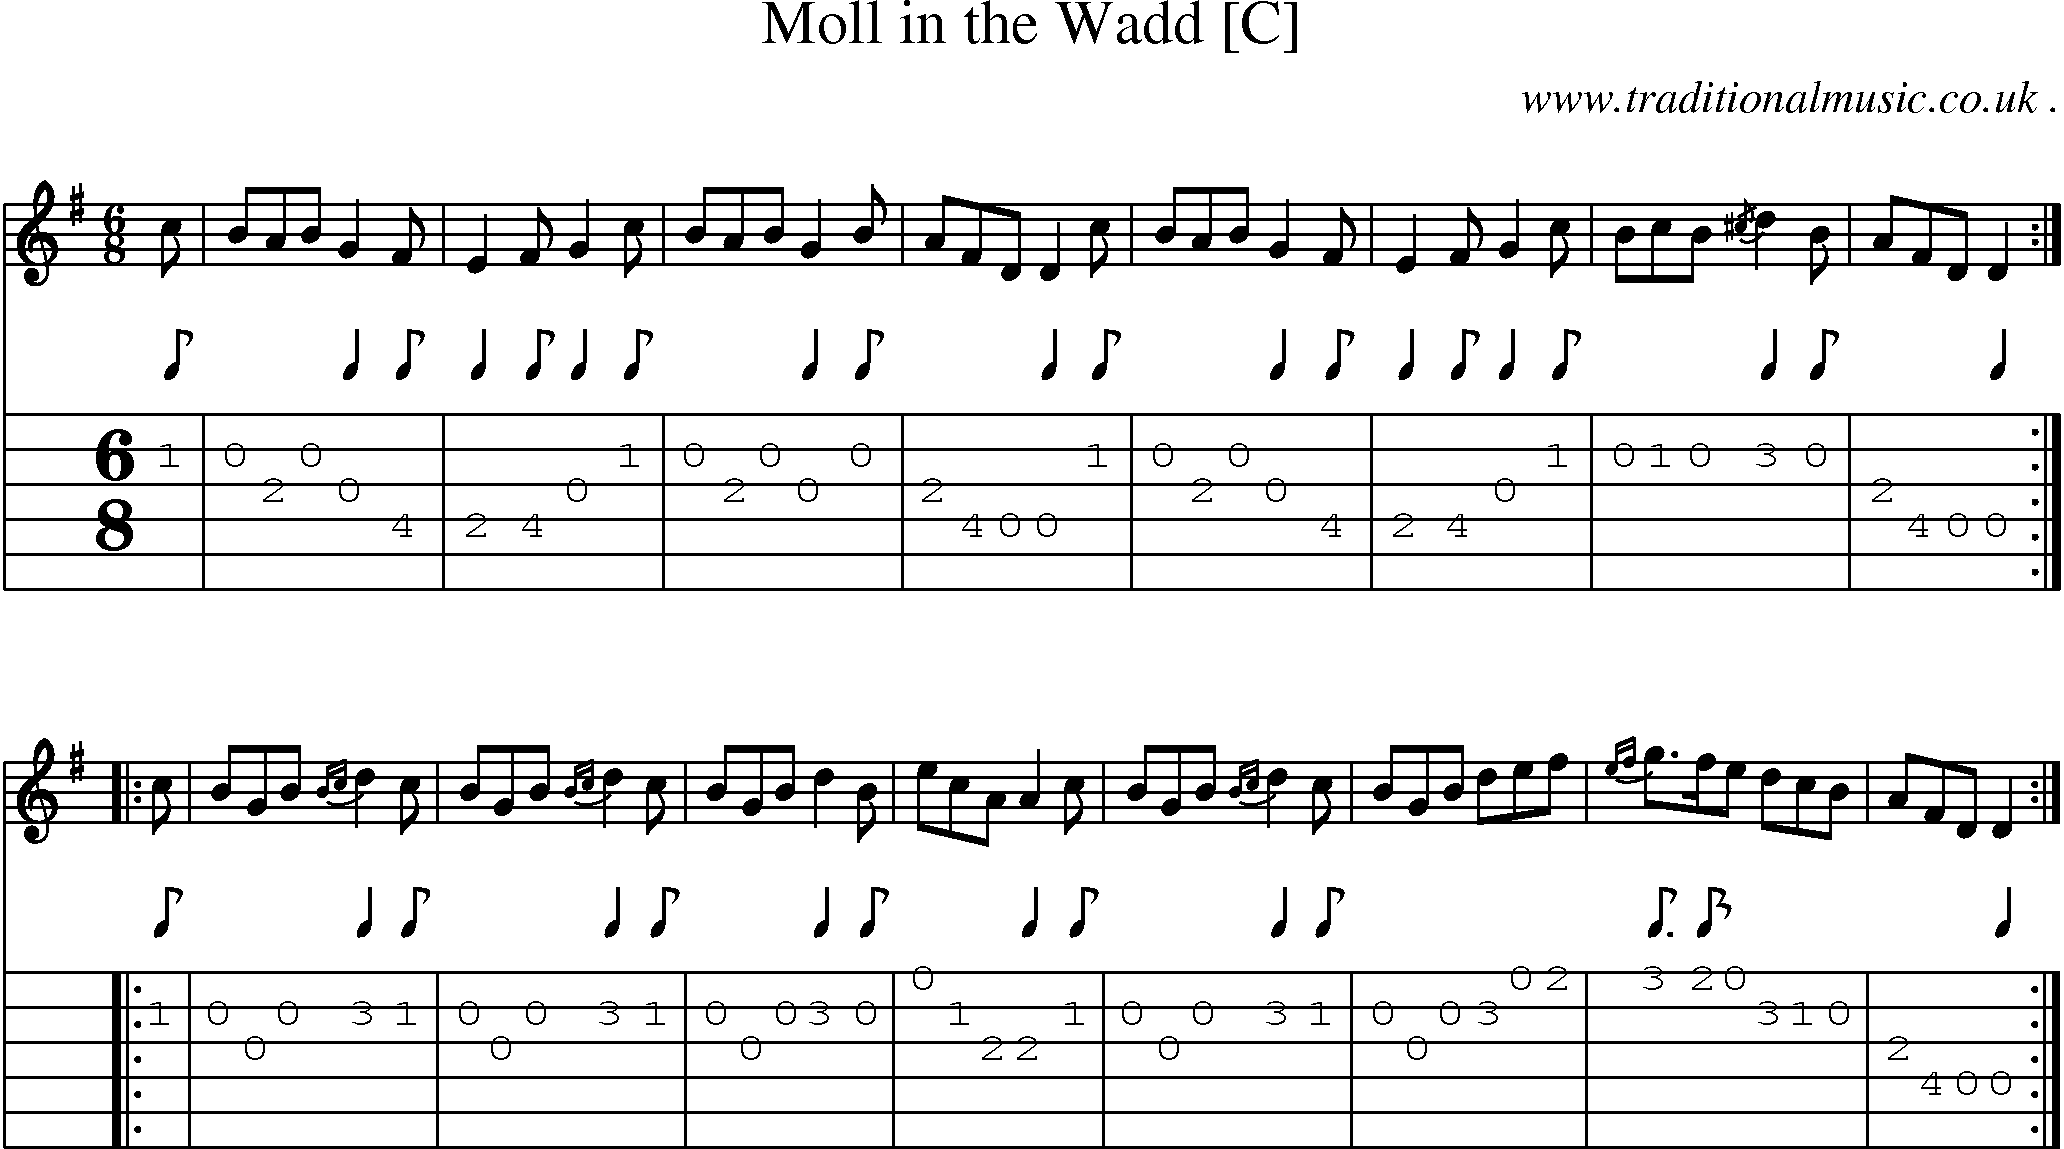 Sheet-music  score, Chords and Guitar Tabs for Moll In The Wadd [c]